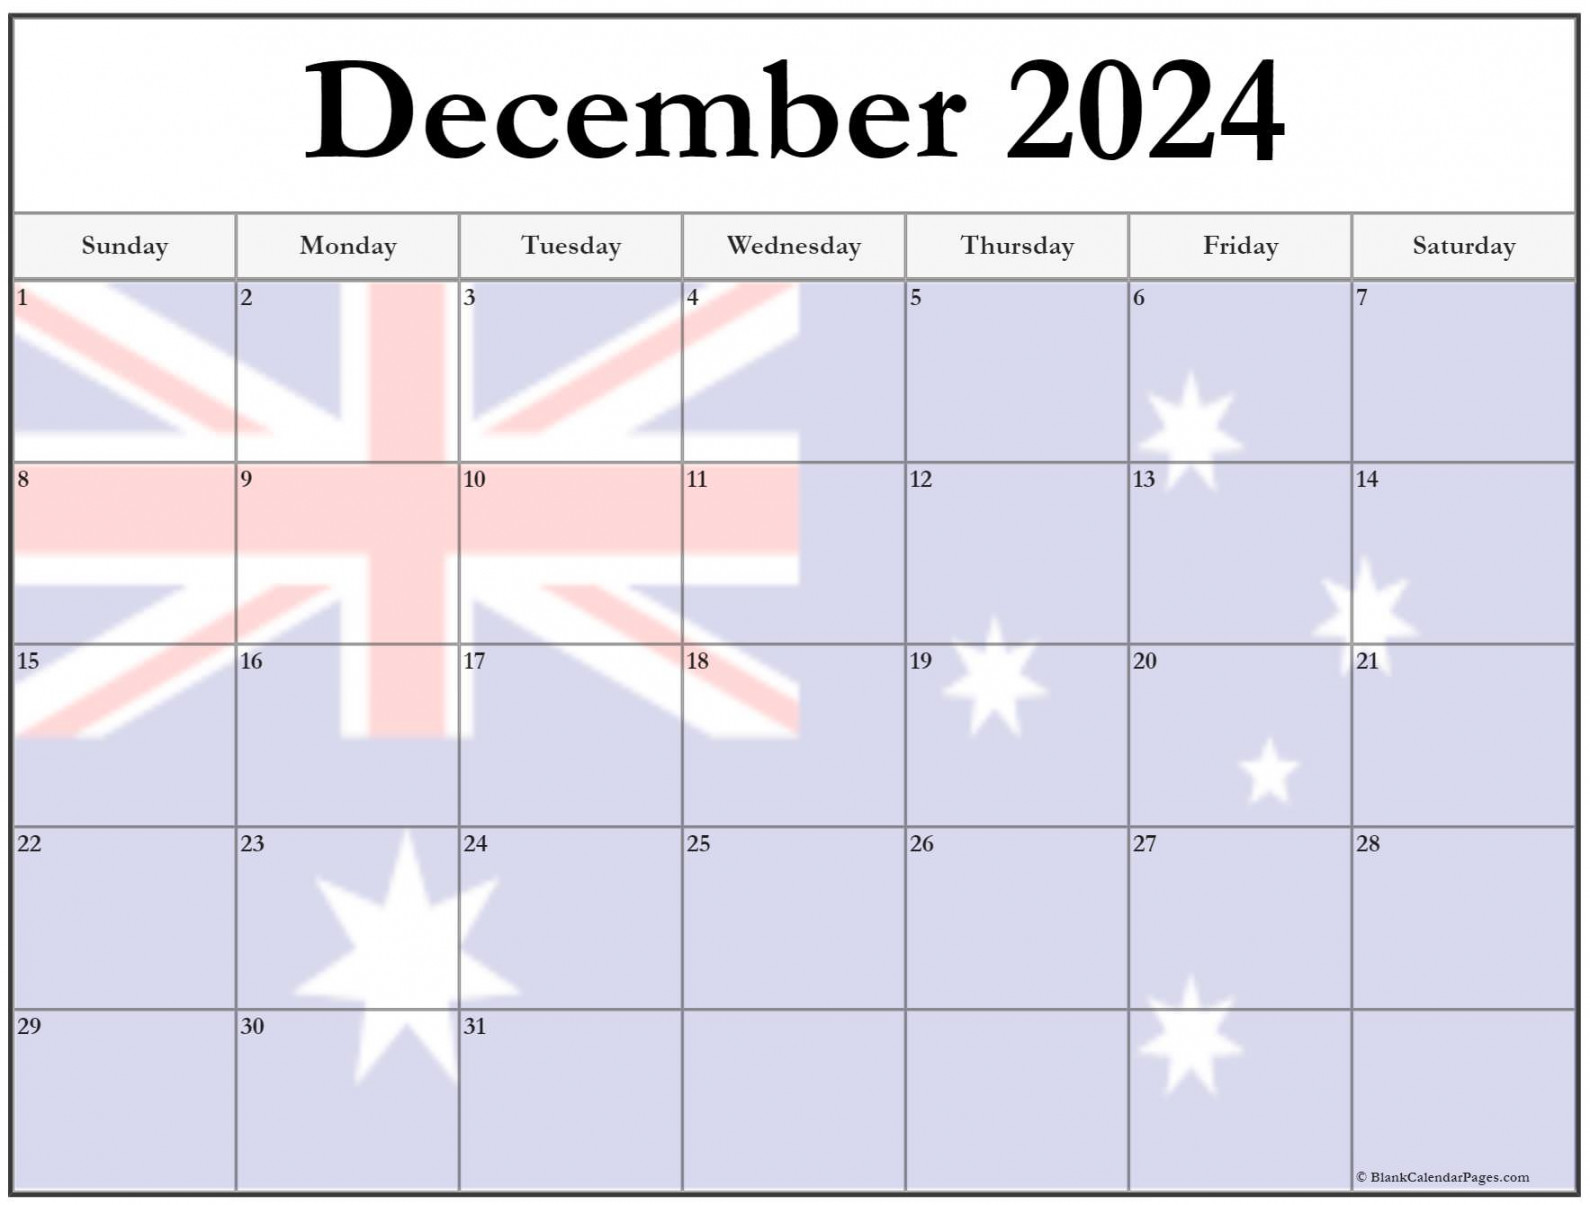 Collection of December  photo calendars with image filters.